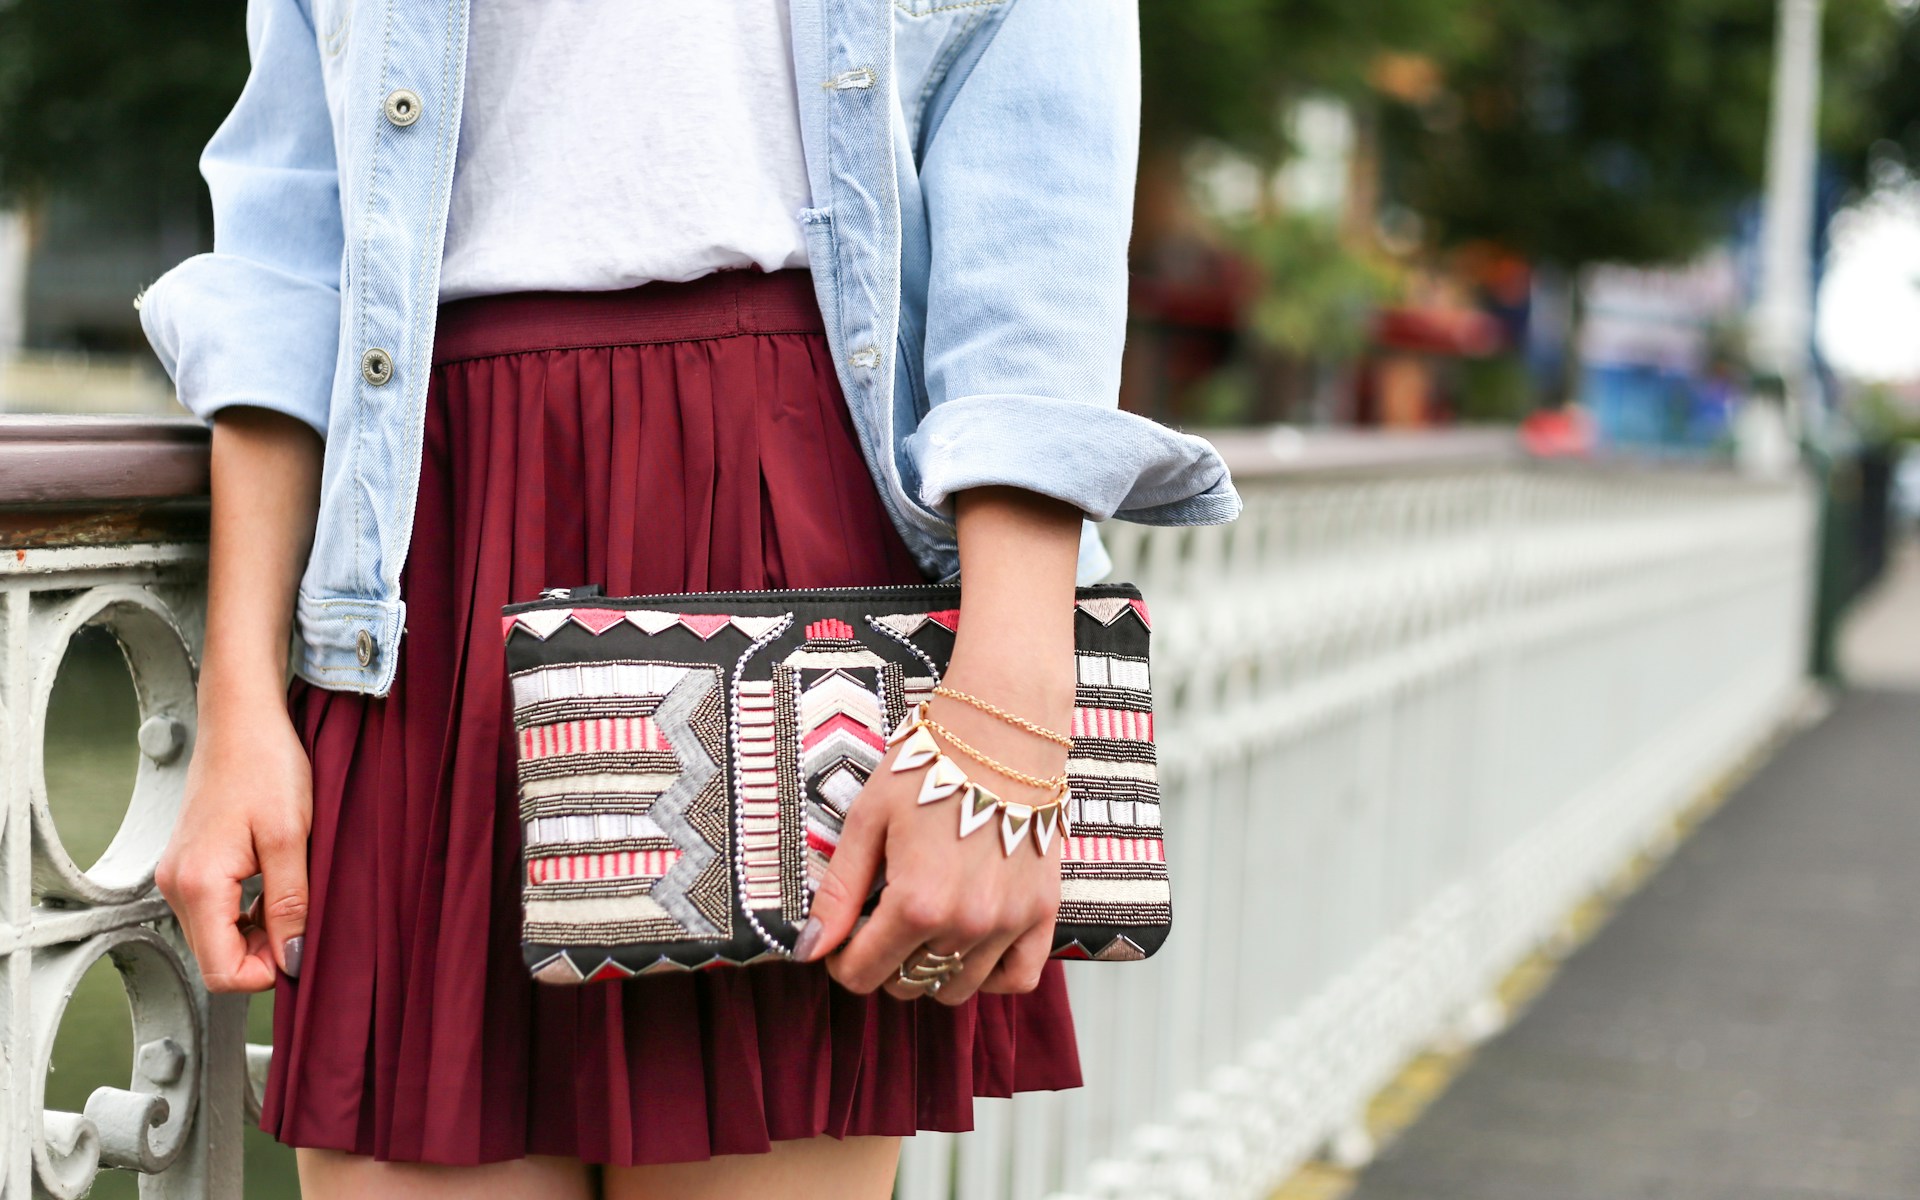 Transform Your Look with Iconic Clutch Bags!